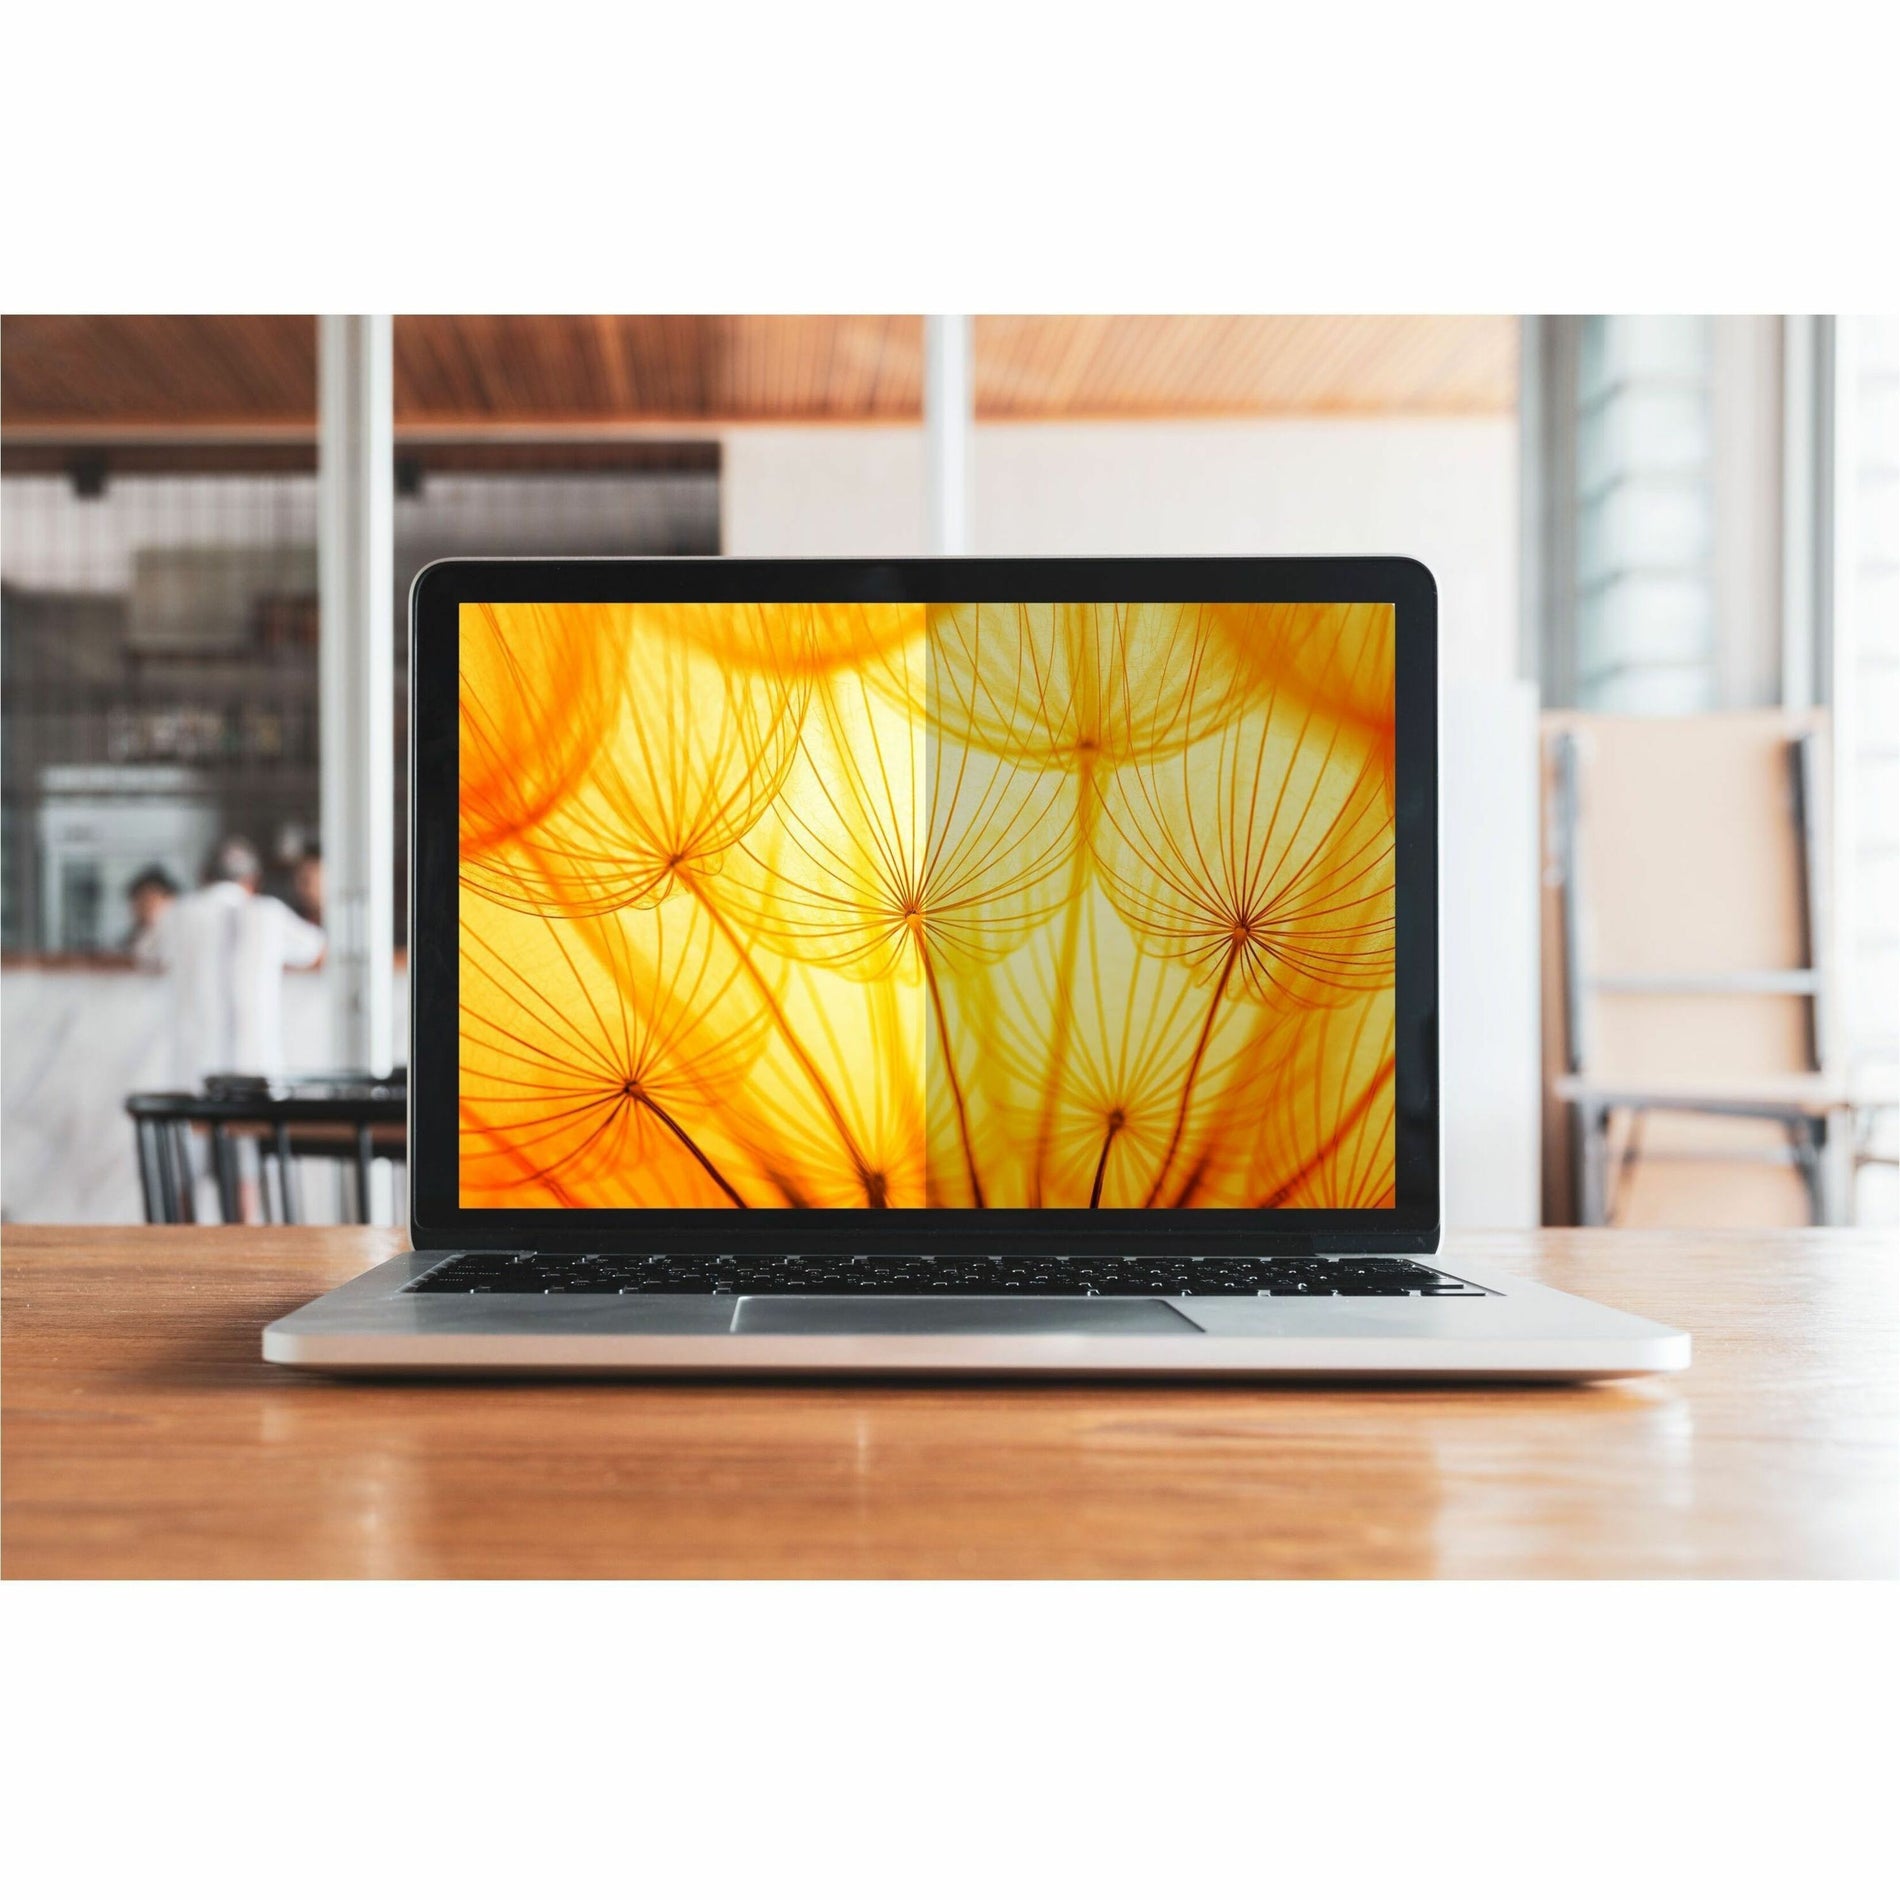 3M BP125W9B Bright Screen Privacy Filter for 12.5in Laptop, 16:9, Ultra Slim, Blue Light Reduction, Matte Black